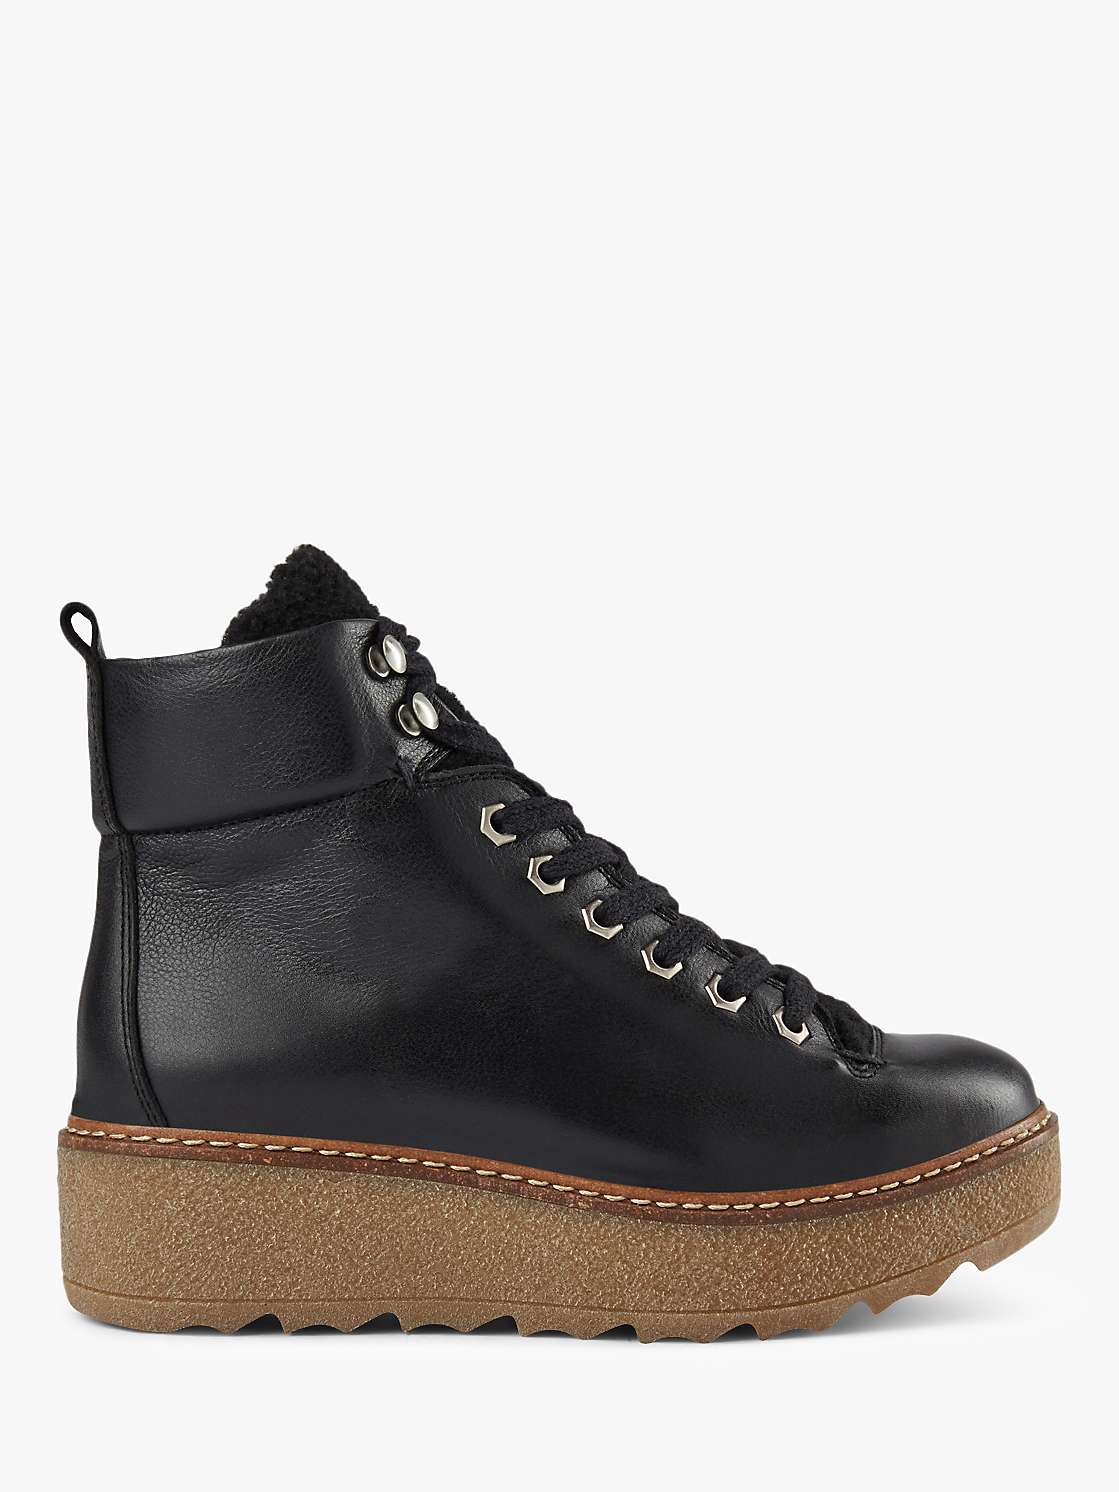 SHOE THE BEAR Bex Leather Lace Up Ankle Boots, Black at John Lewis ...